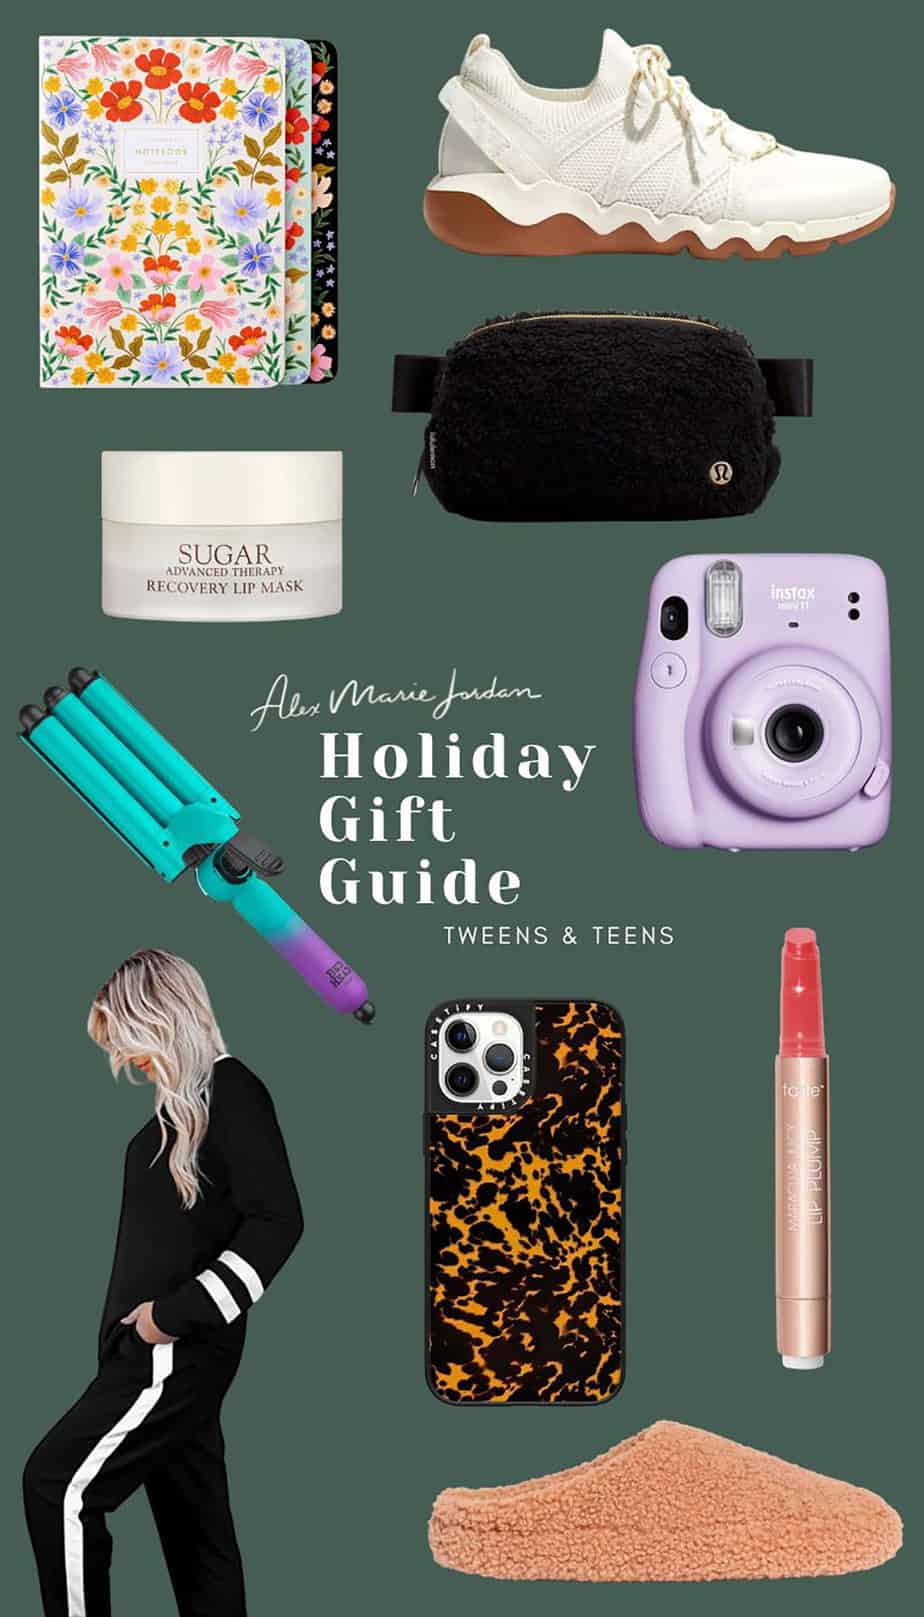 gift guide for pre-teens and teenage girls featuring sneakers, tracksuit, camera, slippers, beauty items like lipgloss, hair curler, fanny pack and pretty notebooks.